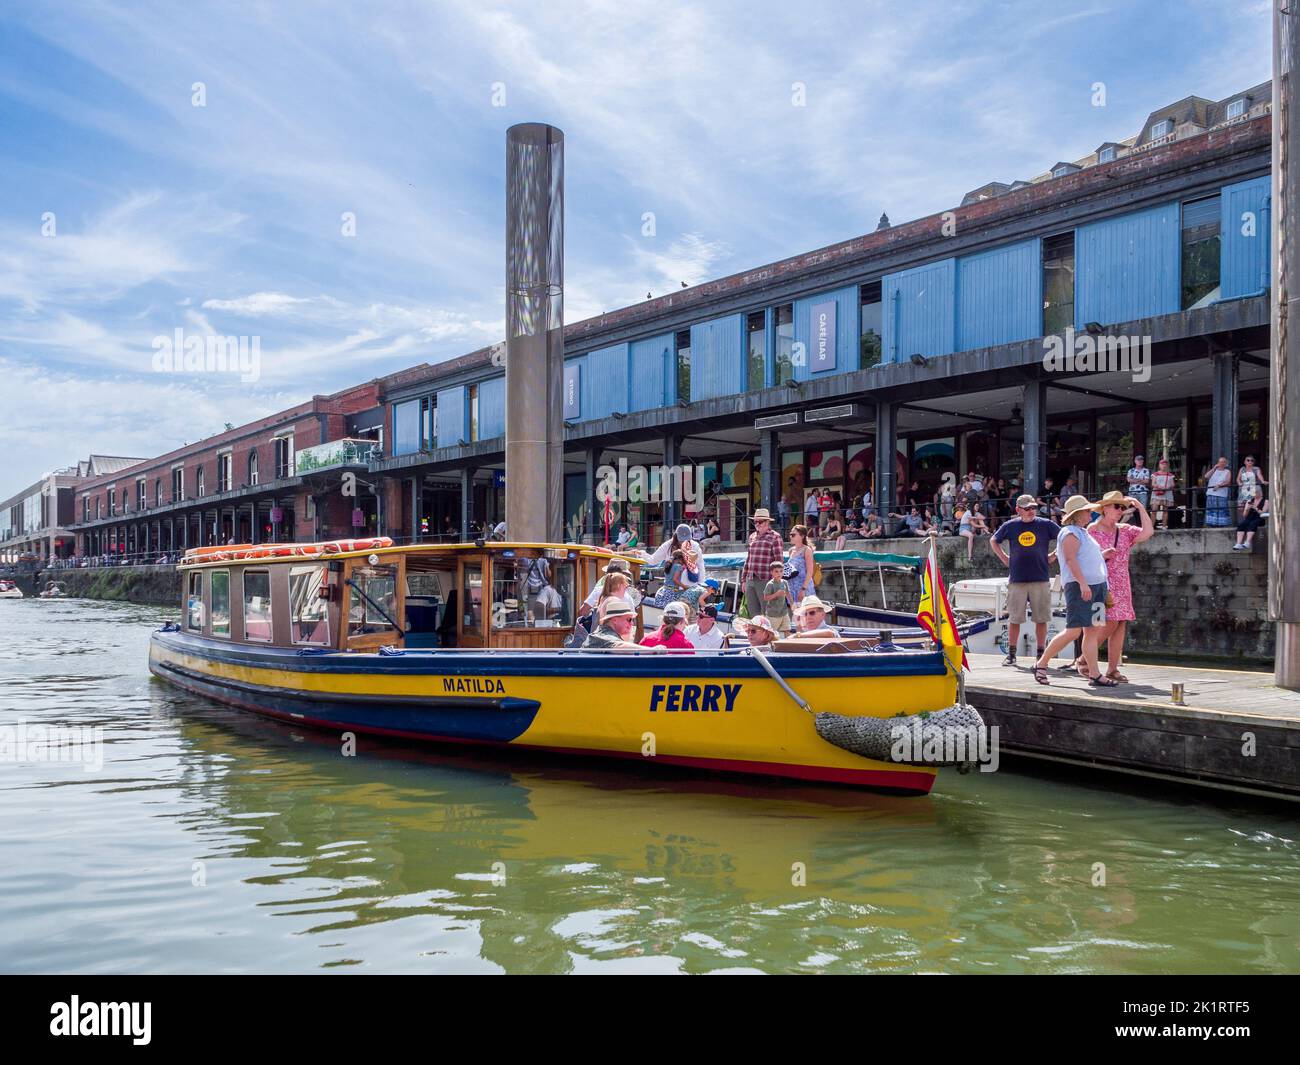 The Matilda ferry waterbus outside the Watershed in the Bristol Floating Harbour in the City of Bristol during the Bristol Harbour Festival in 2022, England, UK. Stock Photo